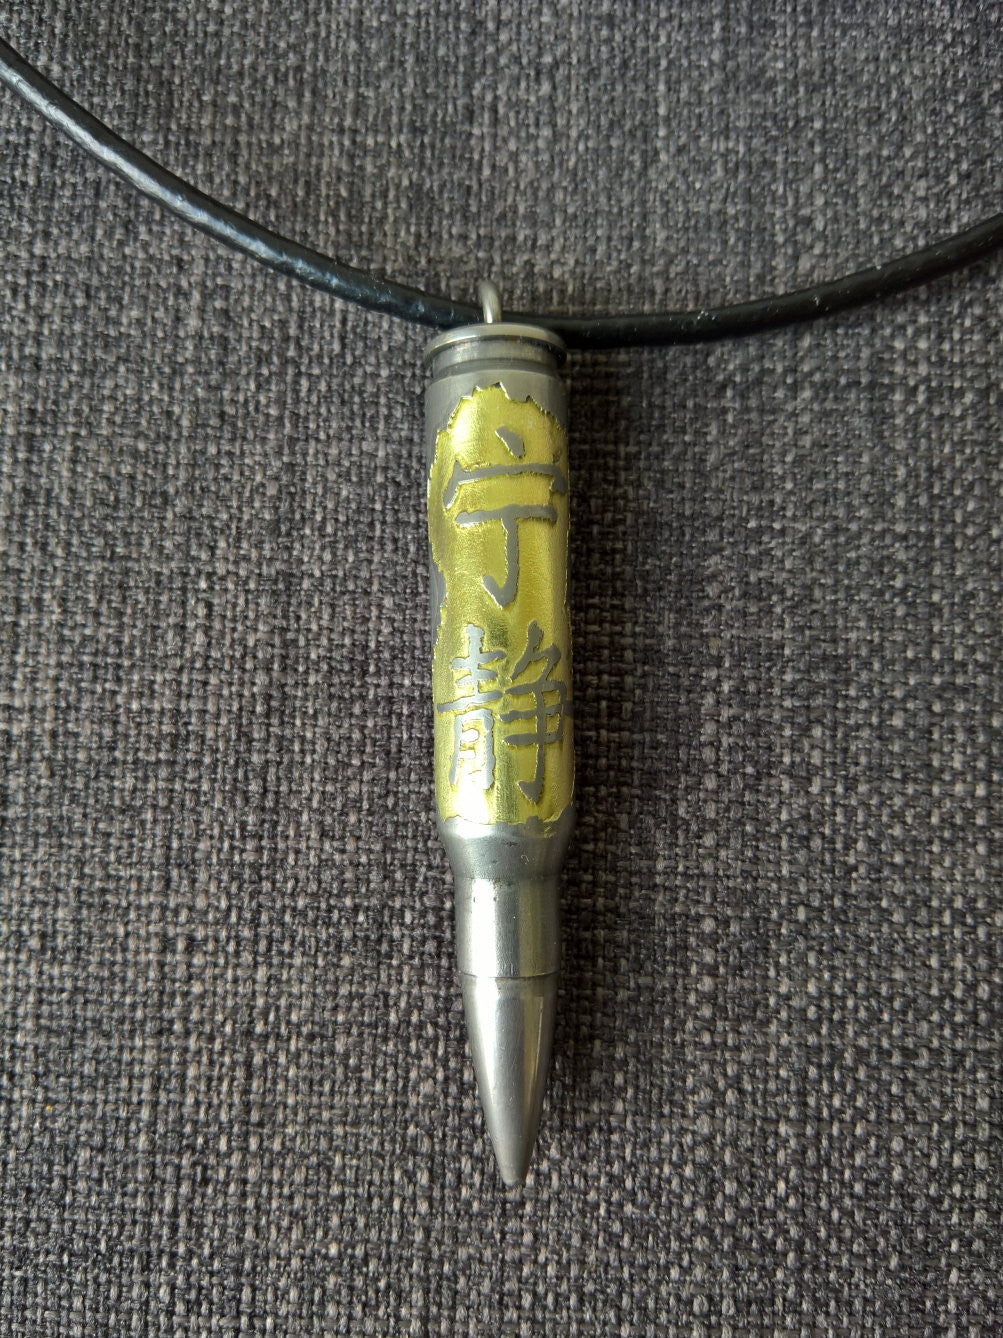 Serenity bullet necklace chinese kanji characters firefly